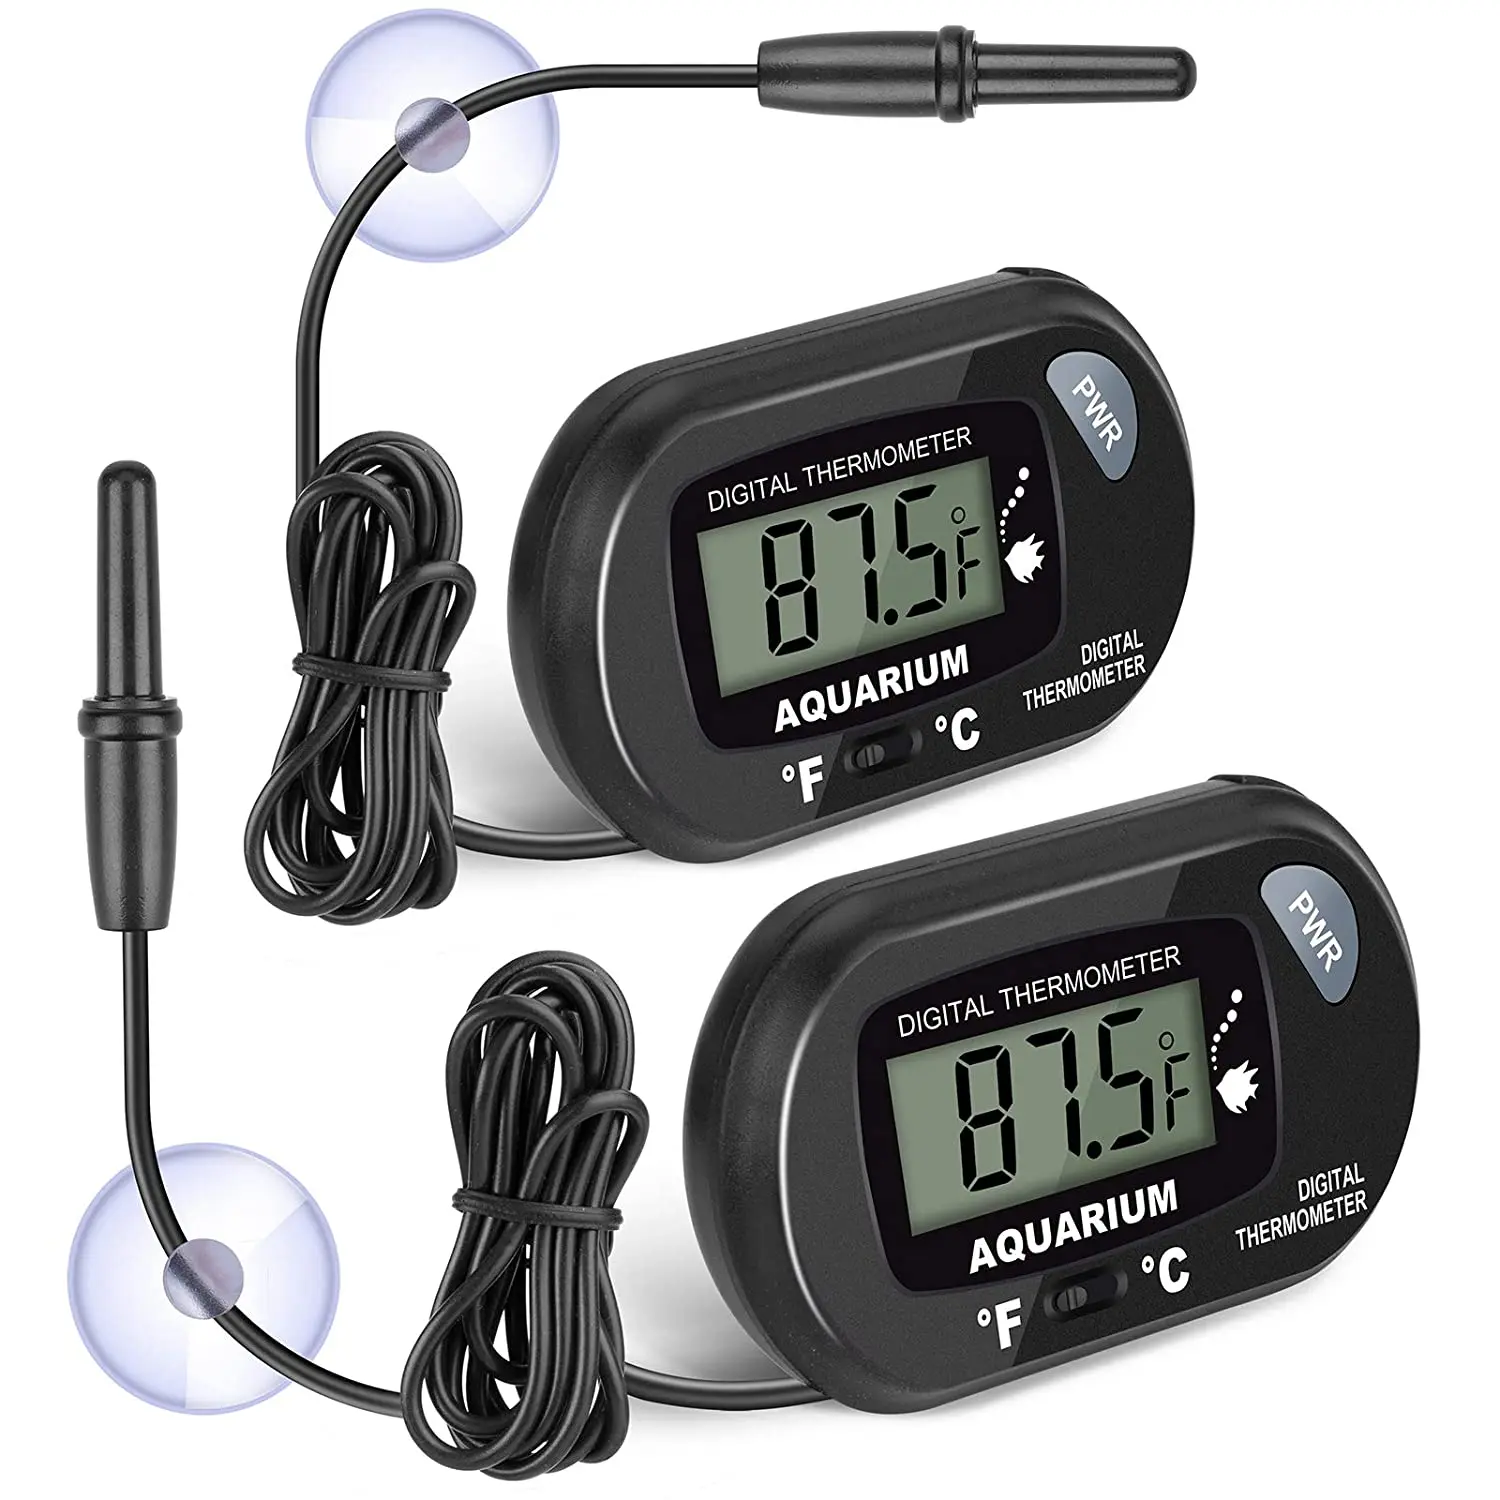 Aquarium Thermometers 2 Pack Digital LCD Water Thermometer for